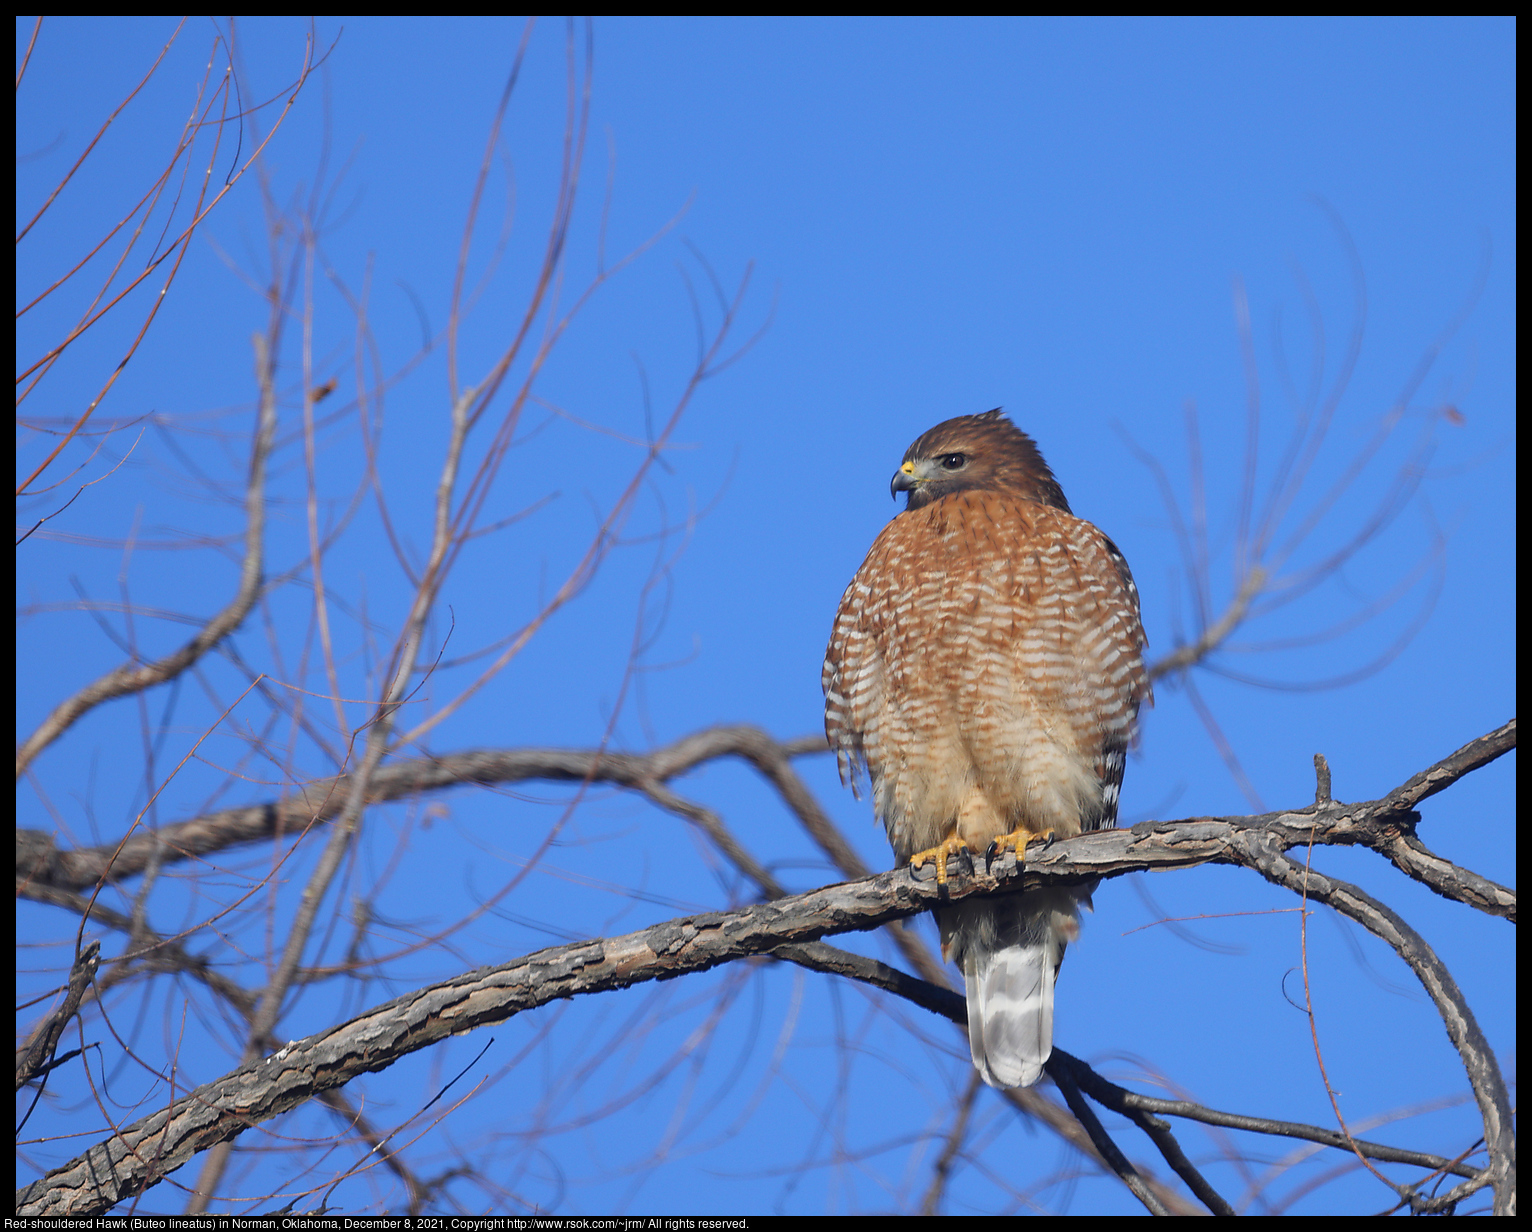 Red-shouldered Hawk (Buteo lineatus) in Norman, Oklahoma, December 8, 2021